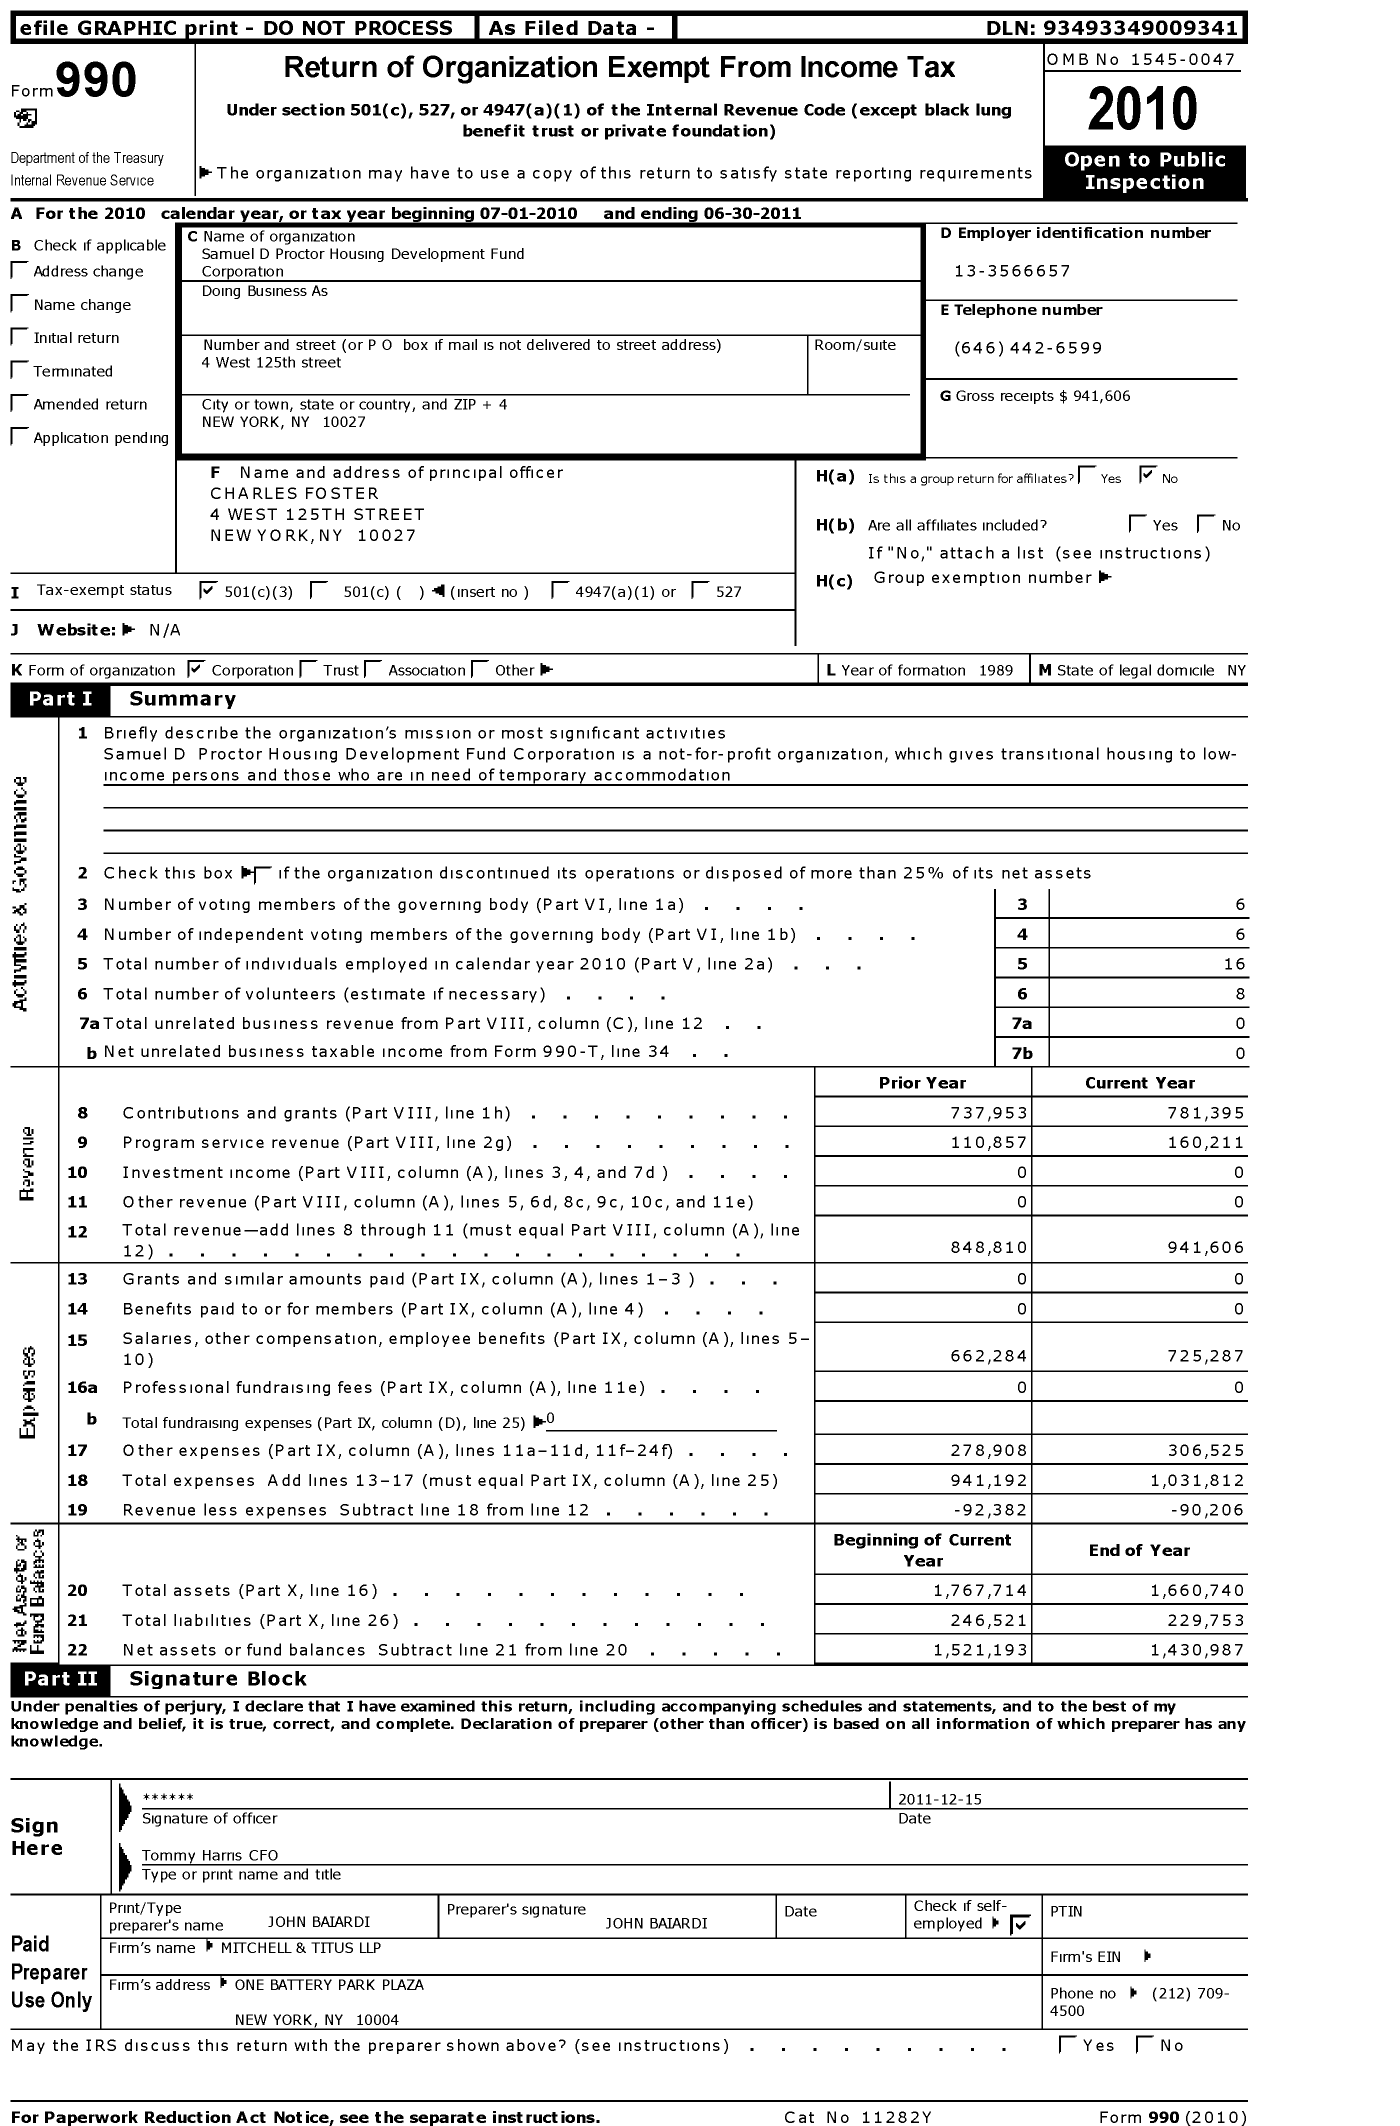 Image of first page of 2010 Form 990 for Samuel D. Proctor Housing Development Fund Corporation